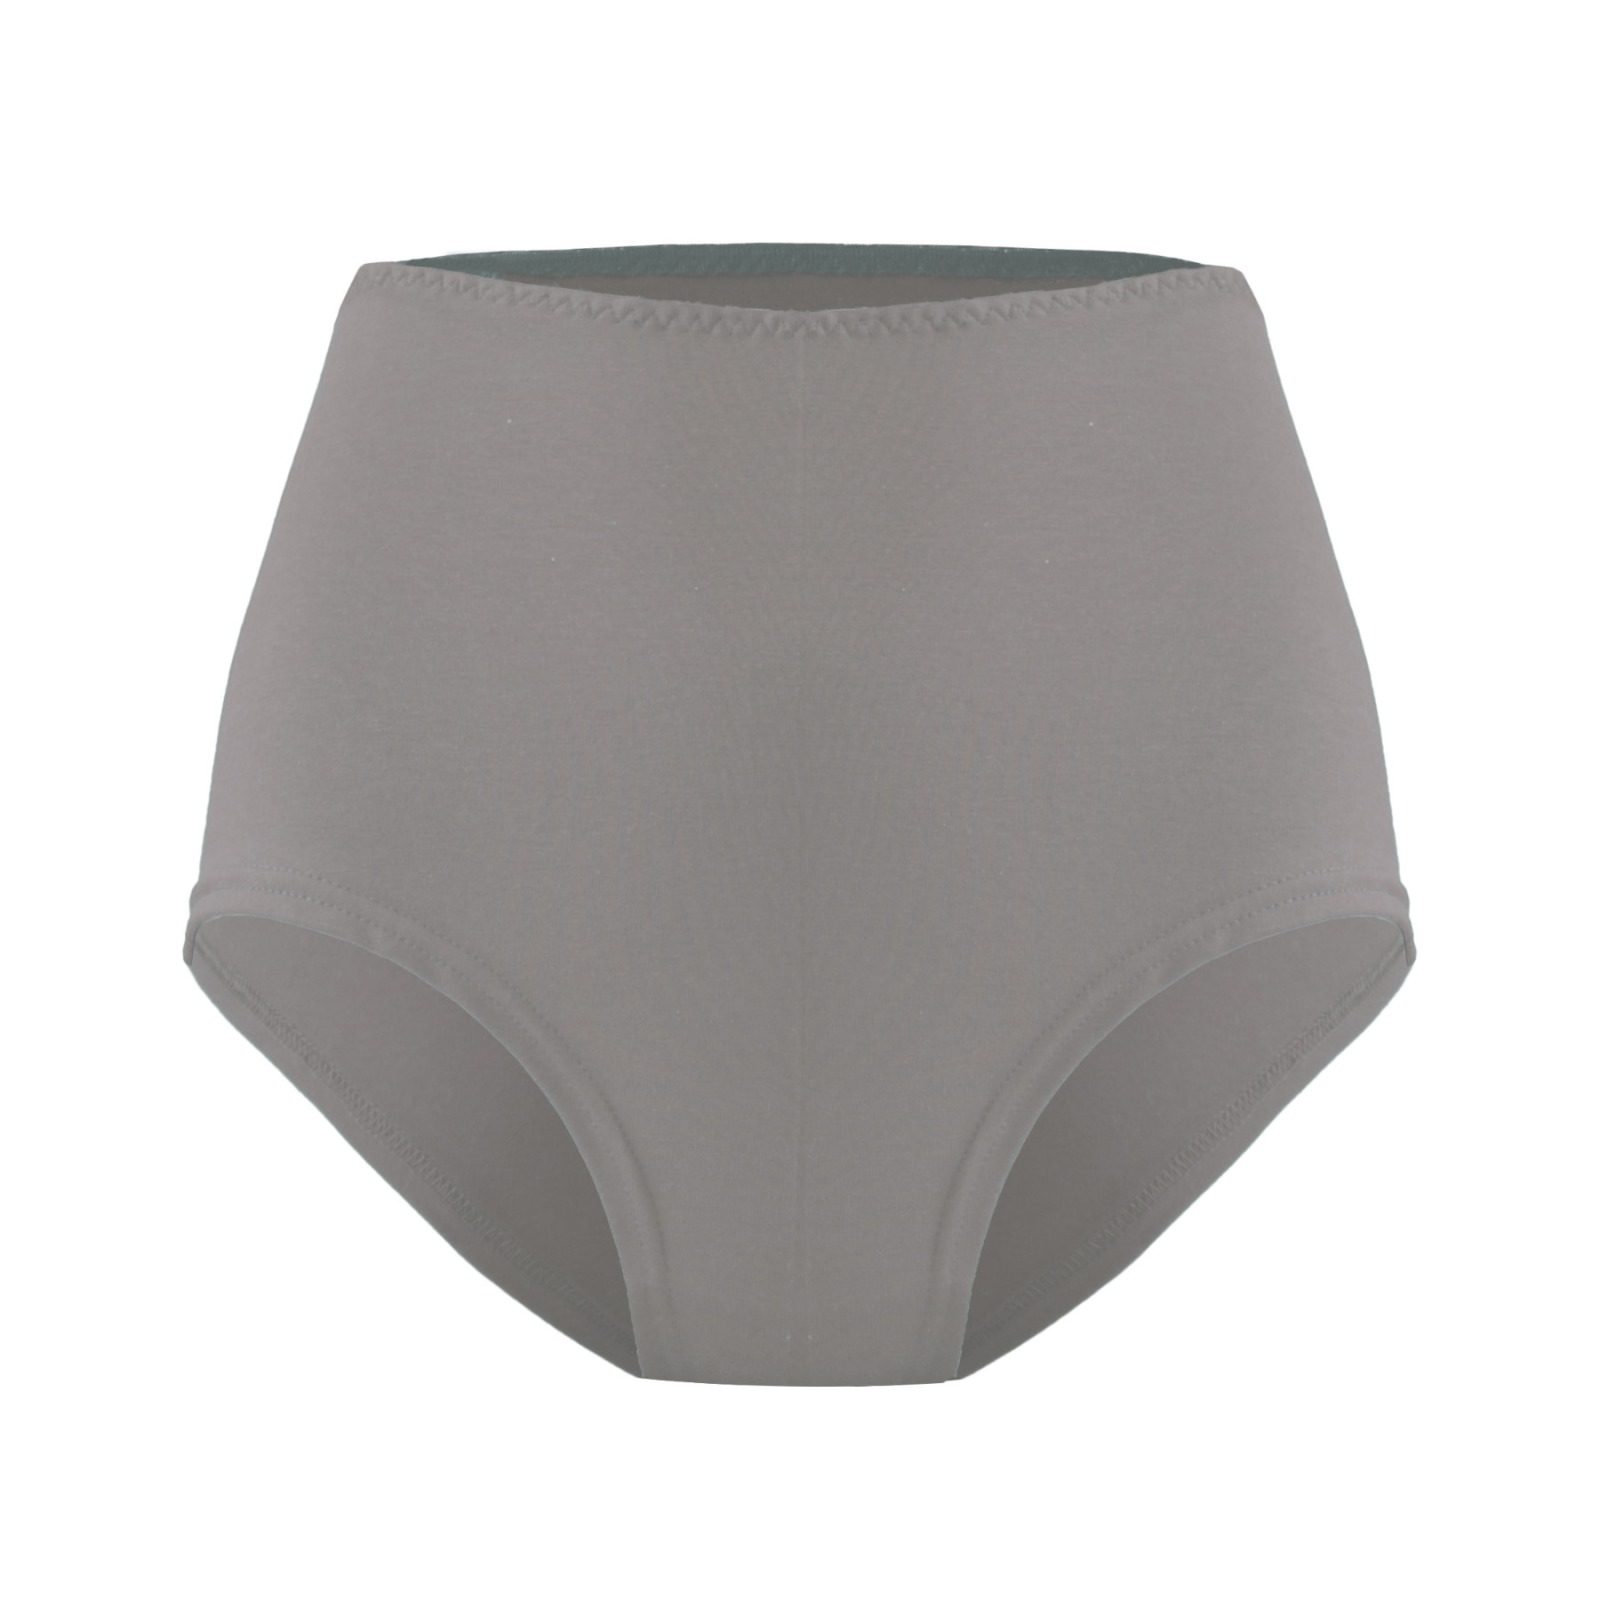 Organic hight waist knickers Lille taupe grey